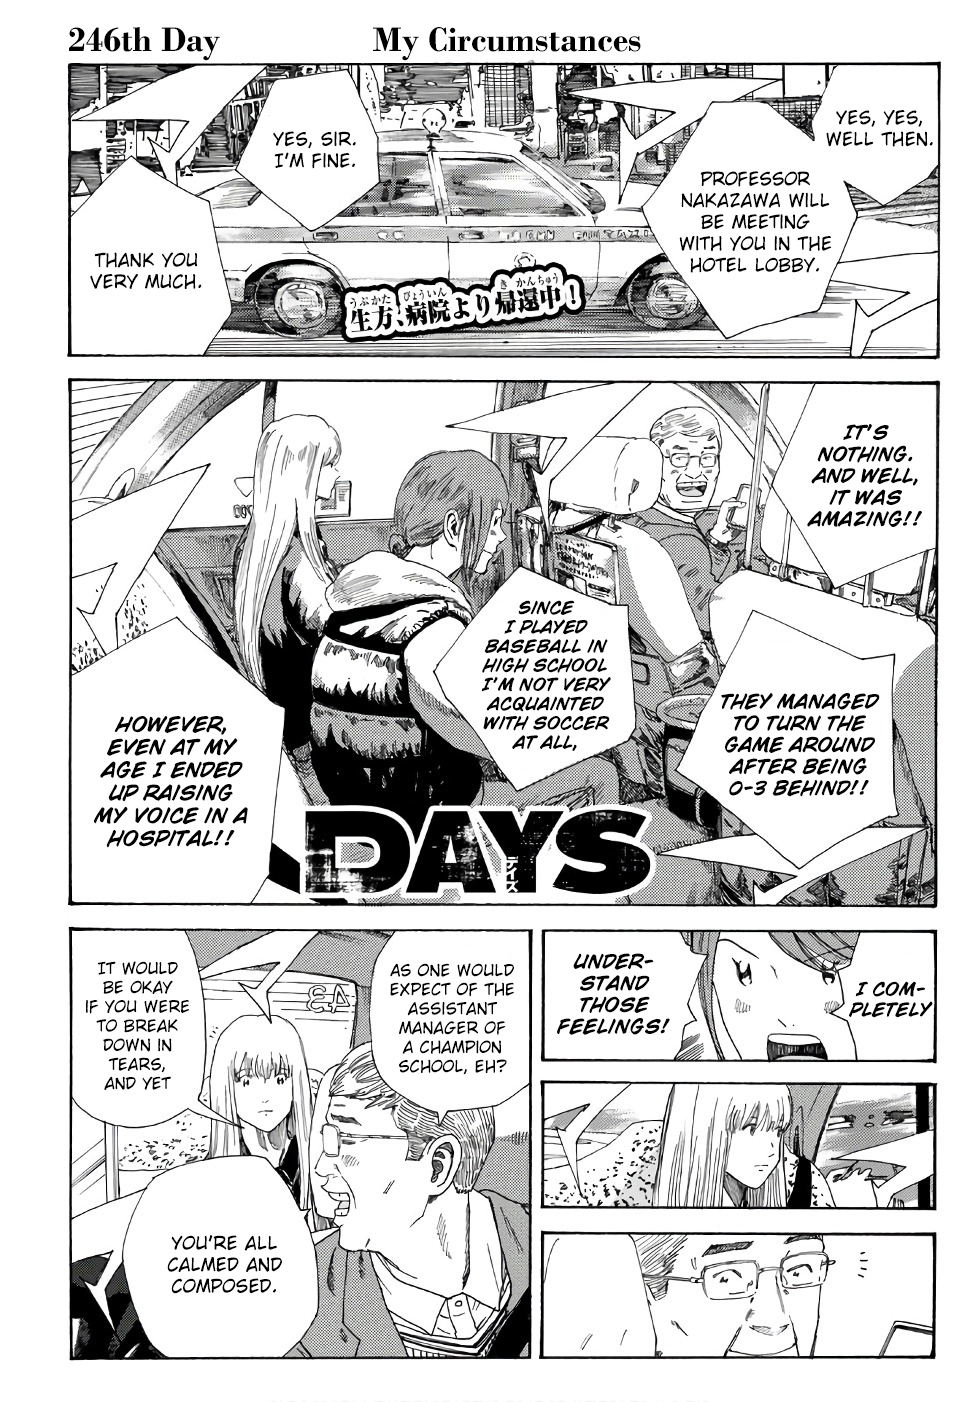 Days Vol.28 Chapter 246: My Circumstances - Picture 2